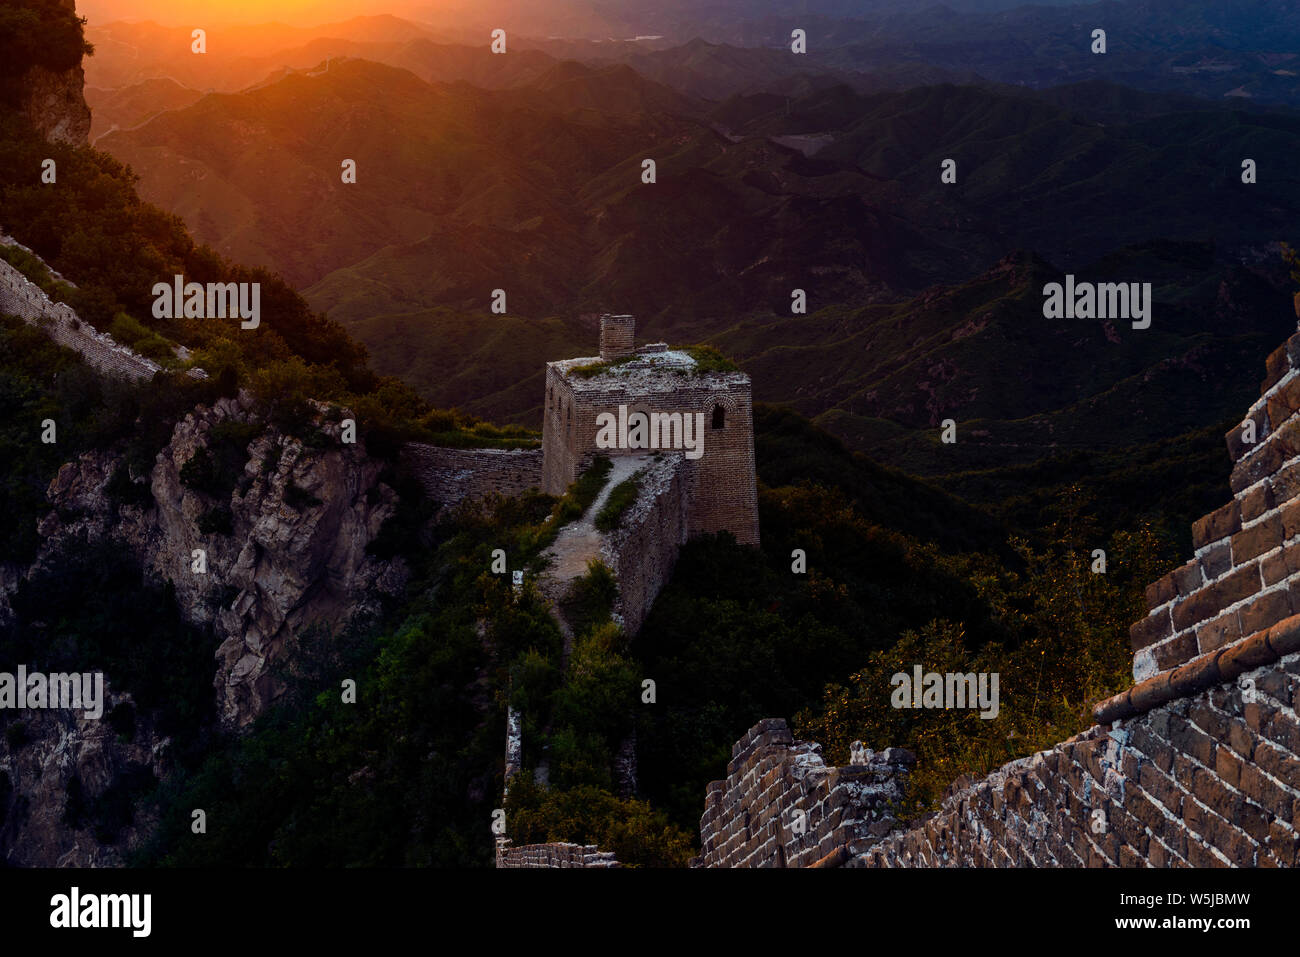 The Great Wall of China - Simitai section near tang jia zhai - this means Tang family village, Tang is a Chines first name.  The famous high castle on Stock Photo